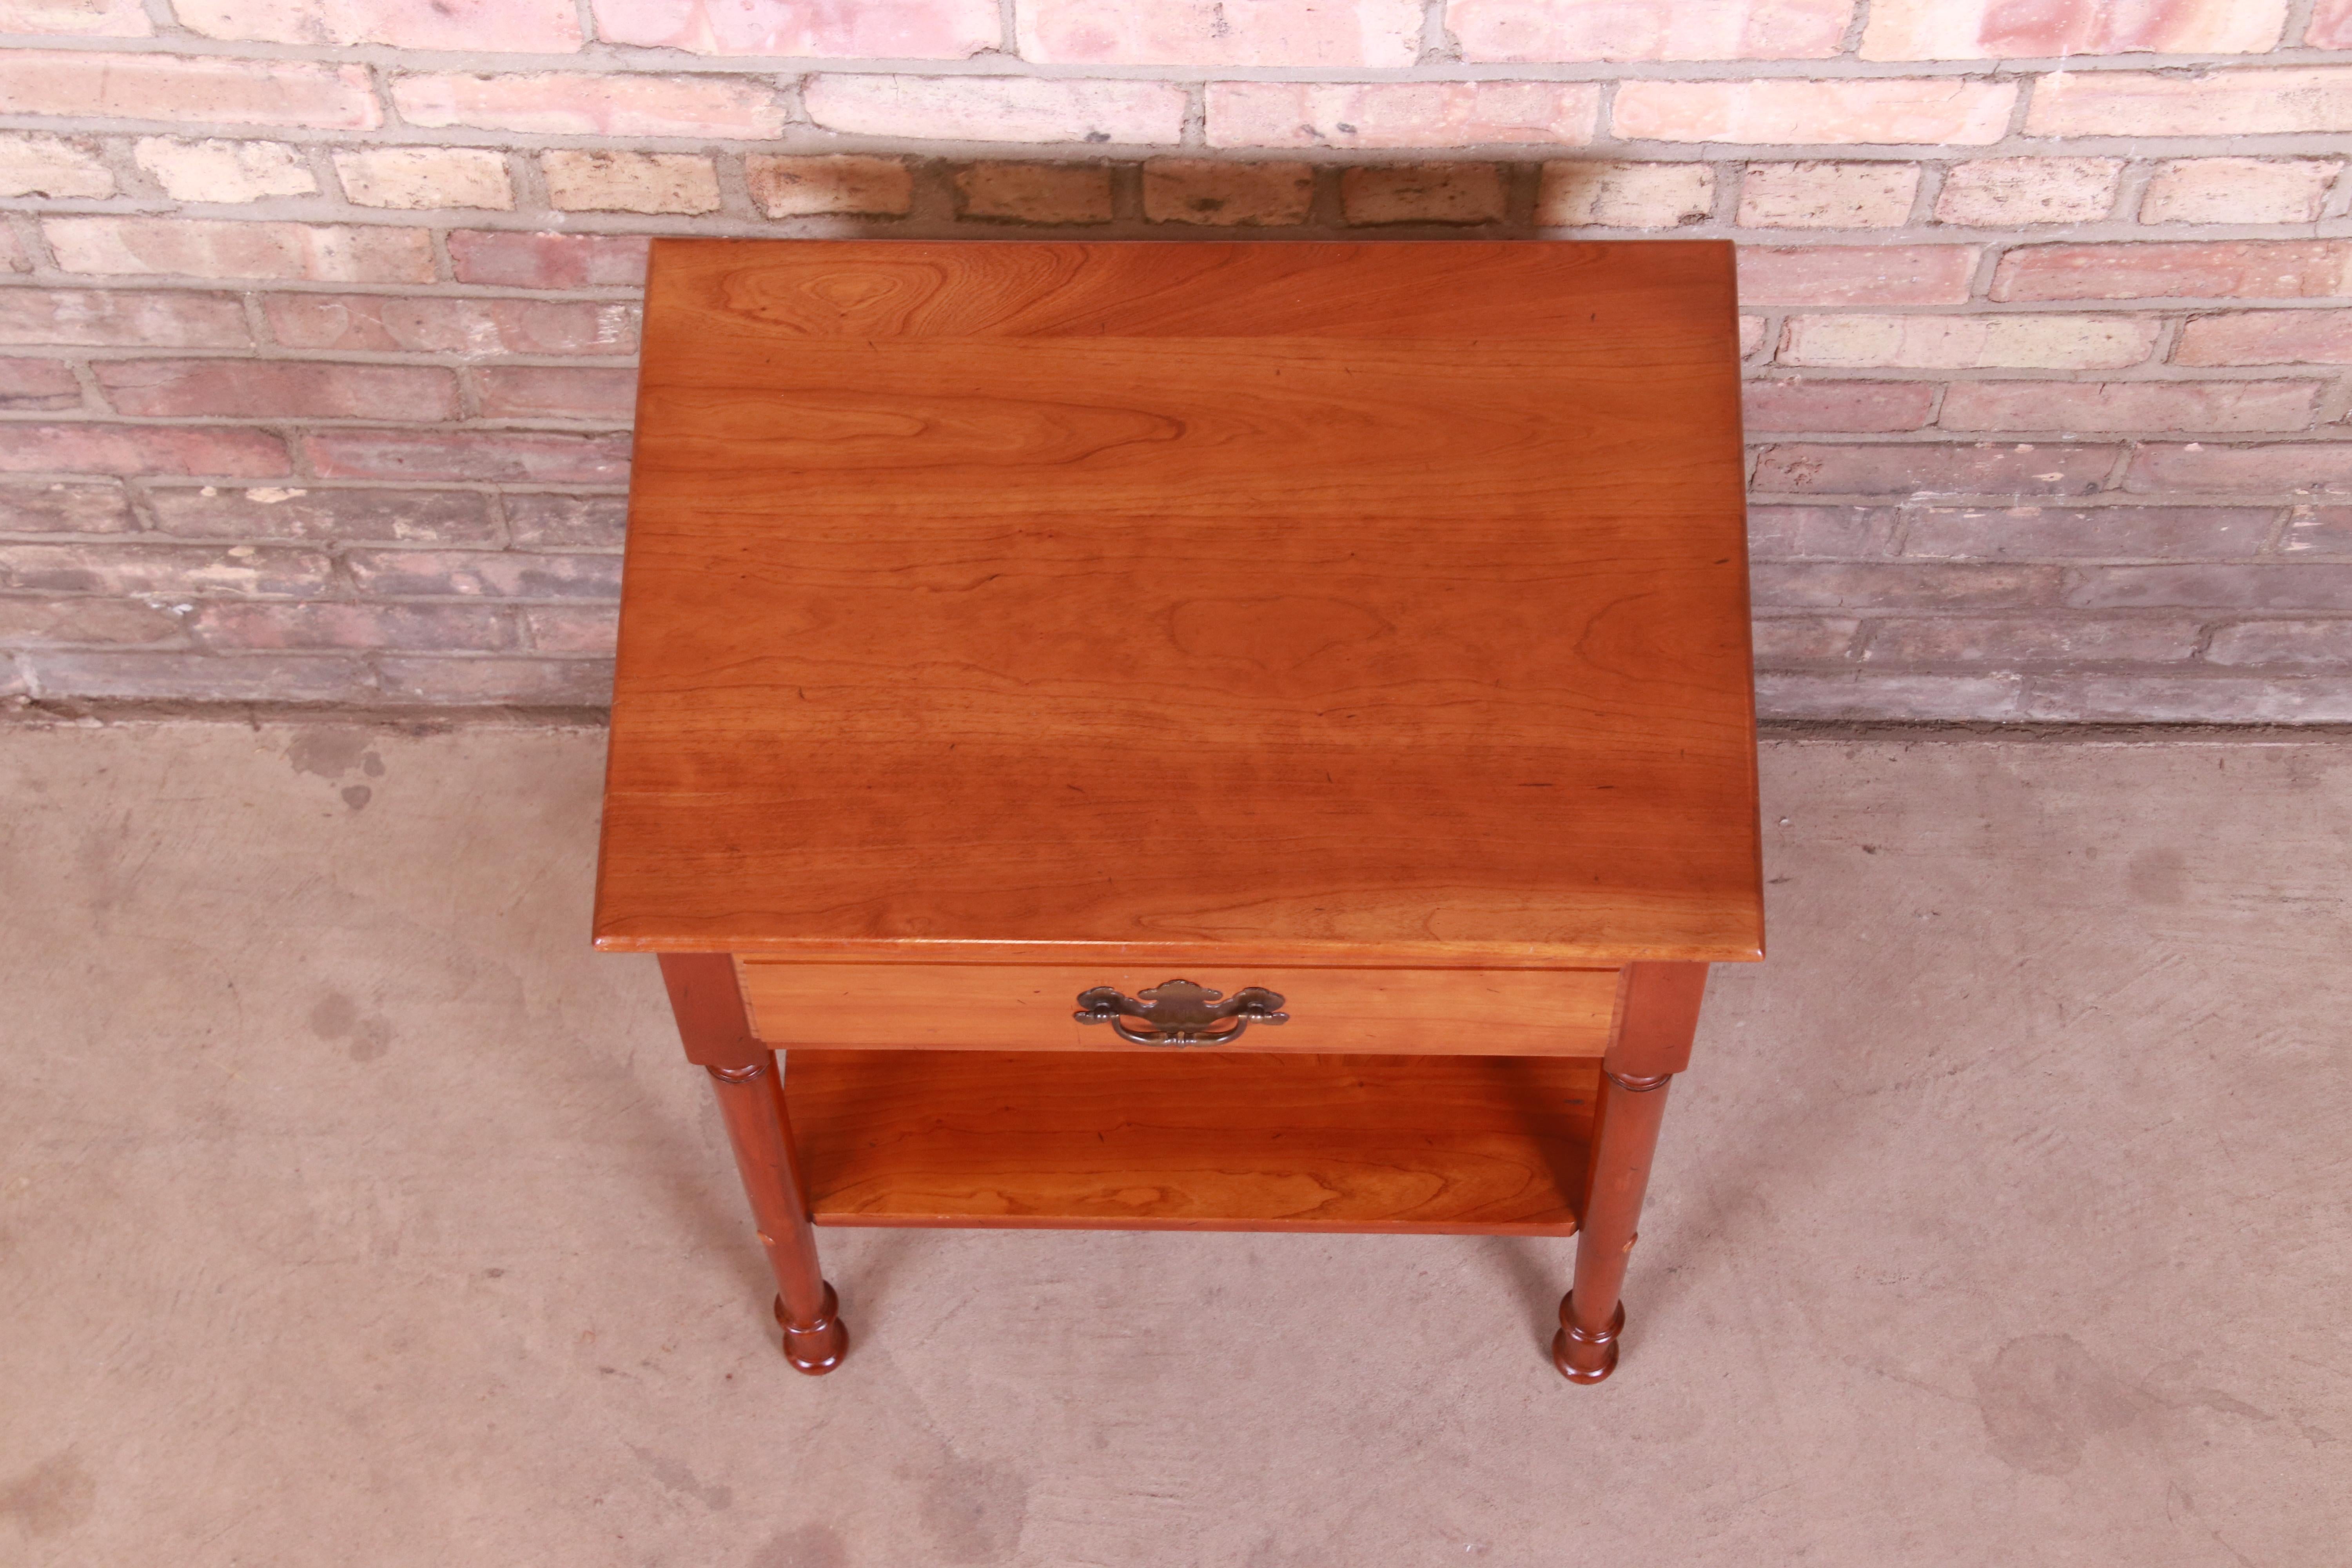 Late 20th Century Stickley American Colonial Solid Cherry Wood Nightstand or Occasional Side Table